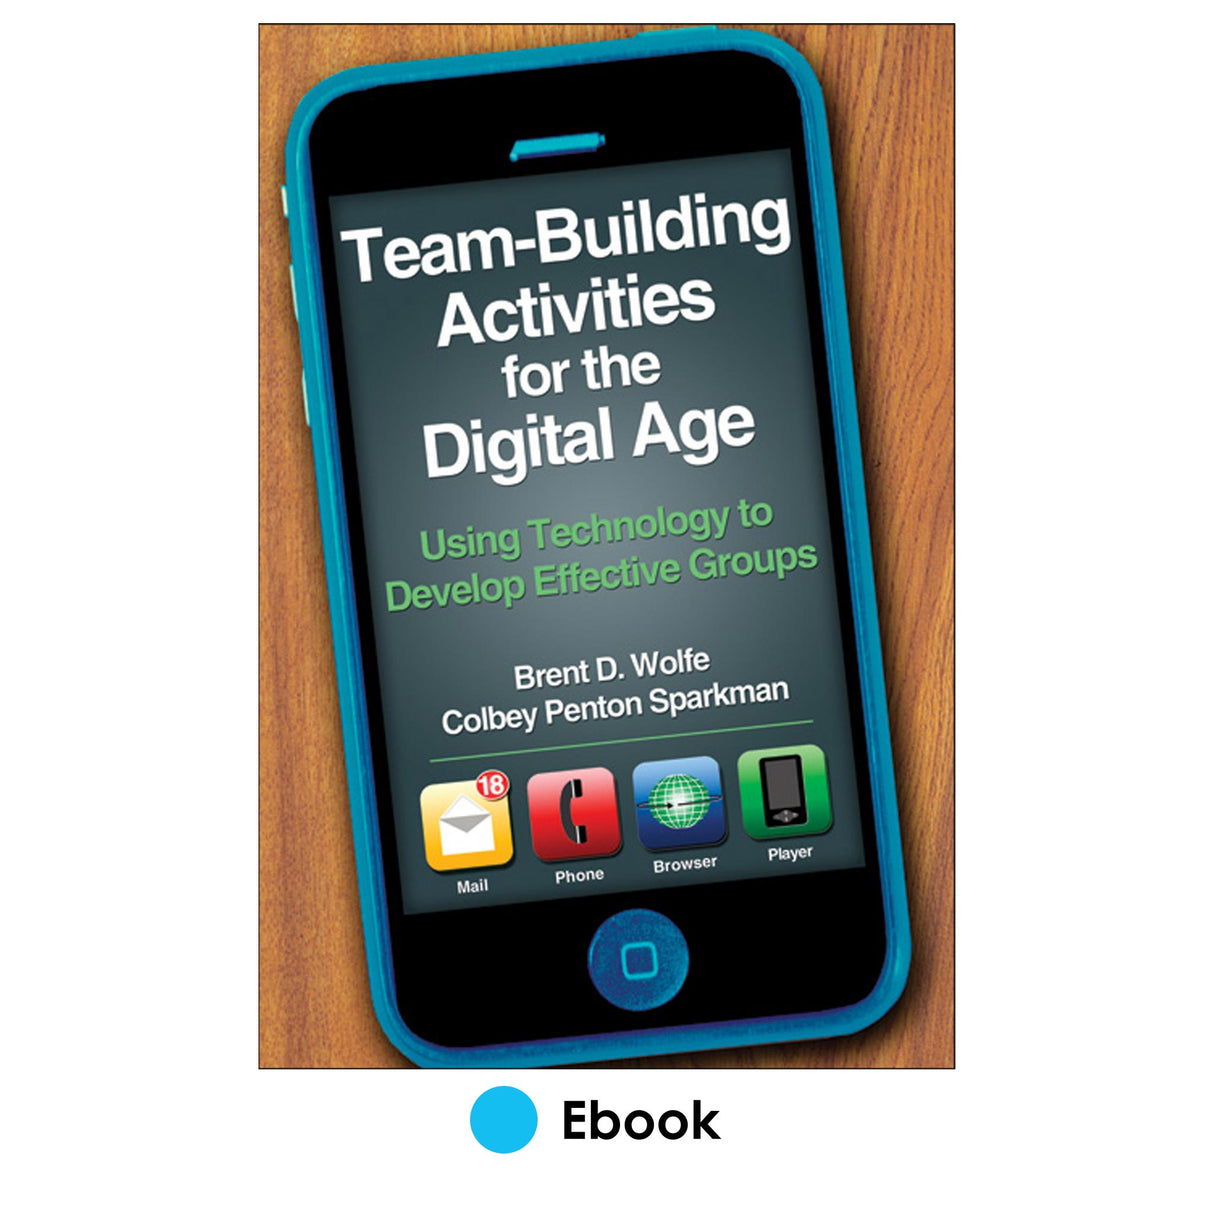 Team-Building Activities for the Digital Age PDF